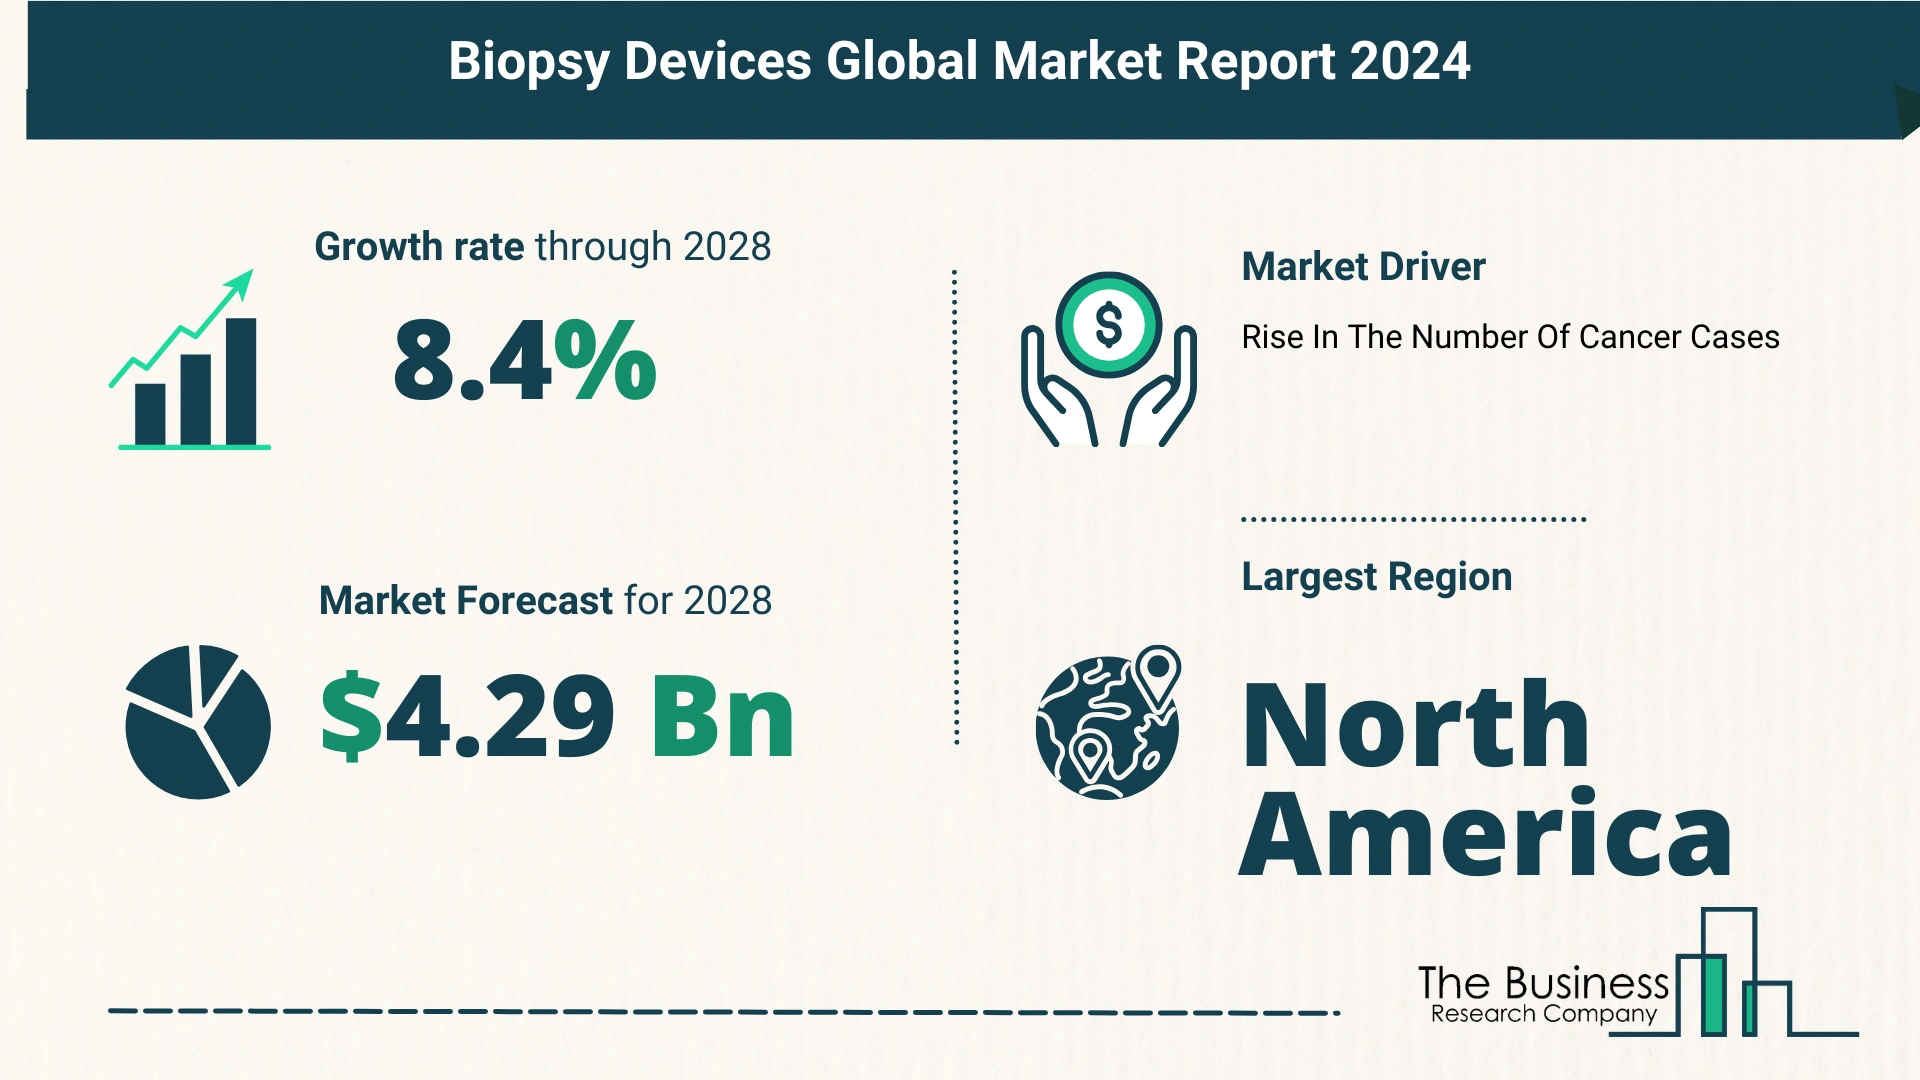 Key Insights On The Biopsy Devices Market 2024 – Size, Driver, And Major Players